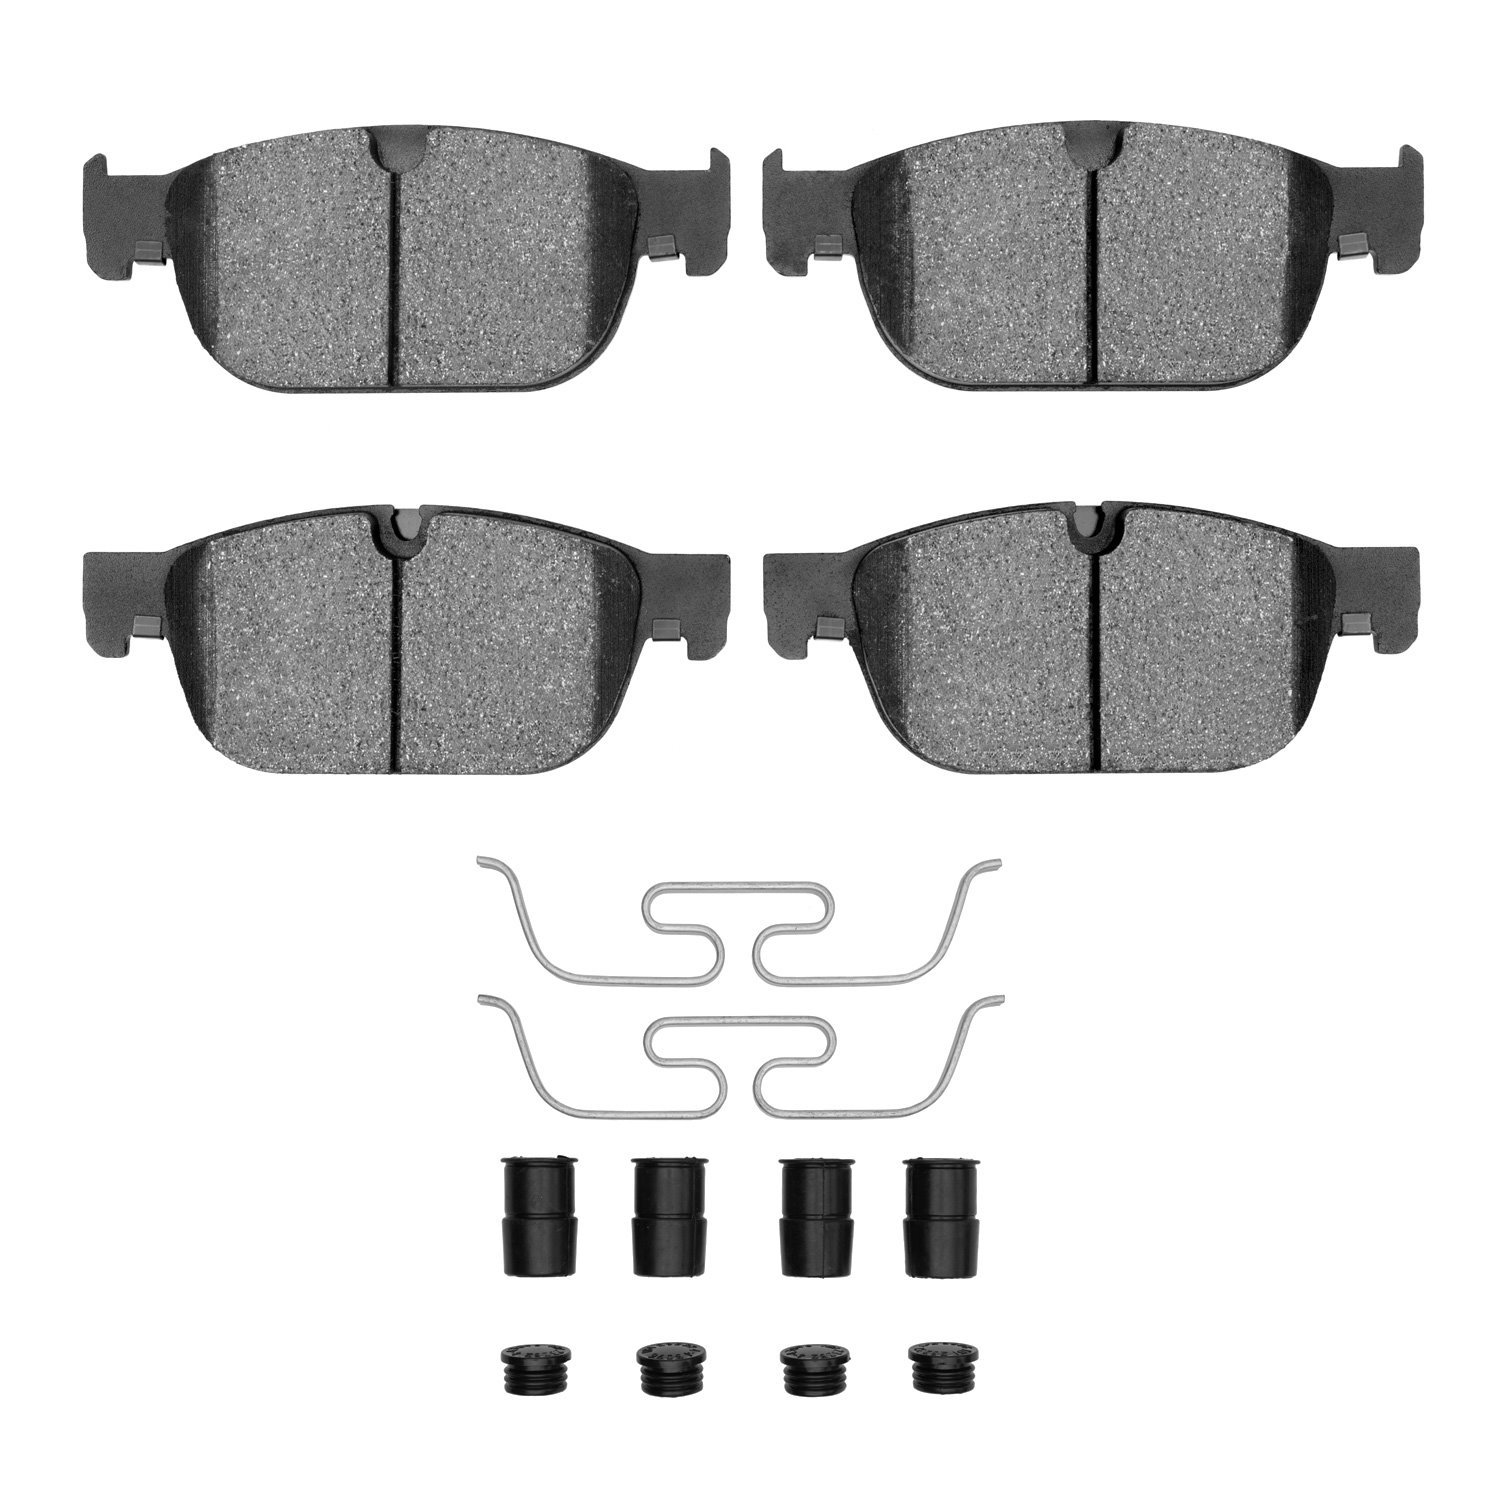 1551-1865-01 5000 Advanced Low-Metallic Brake Pads & Hardware Kit, Fits Select Multiple Makes/Models, Position: Front